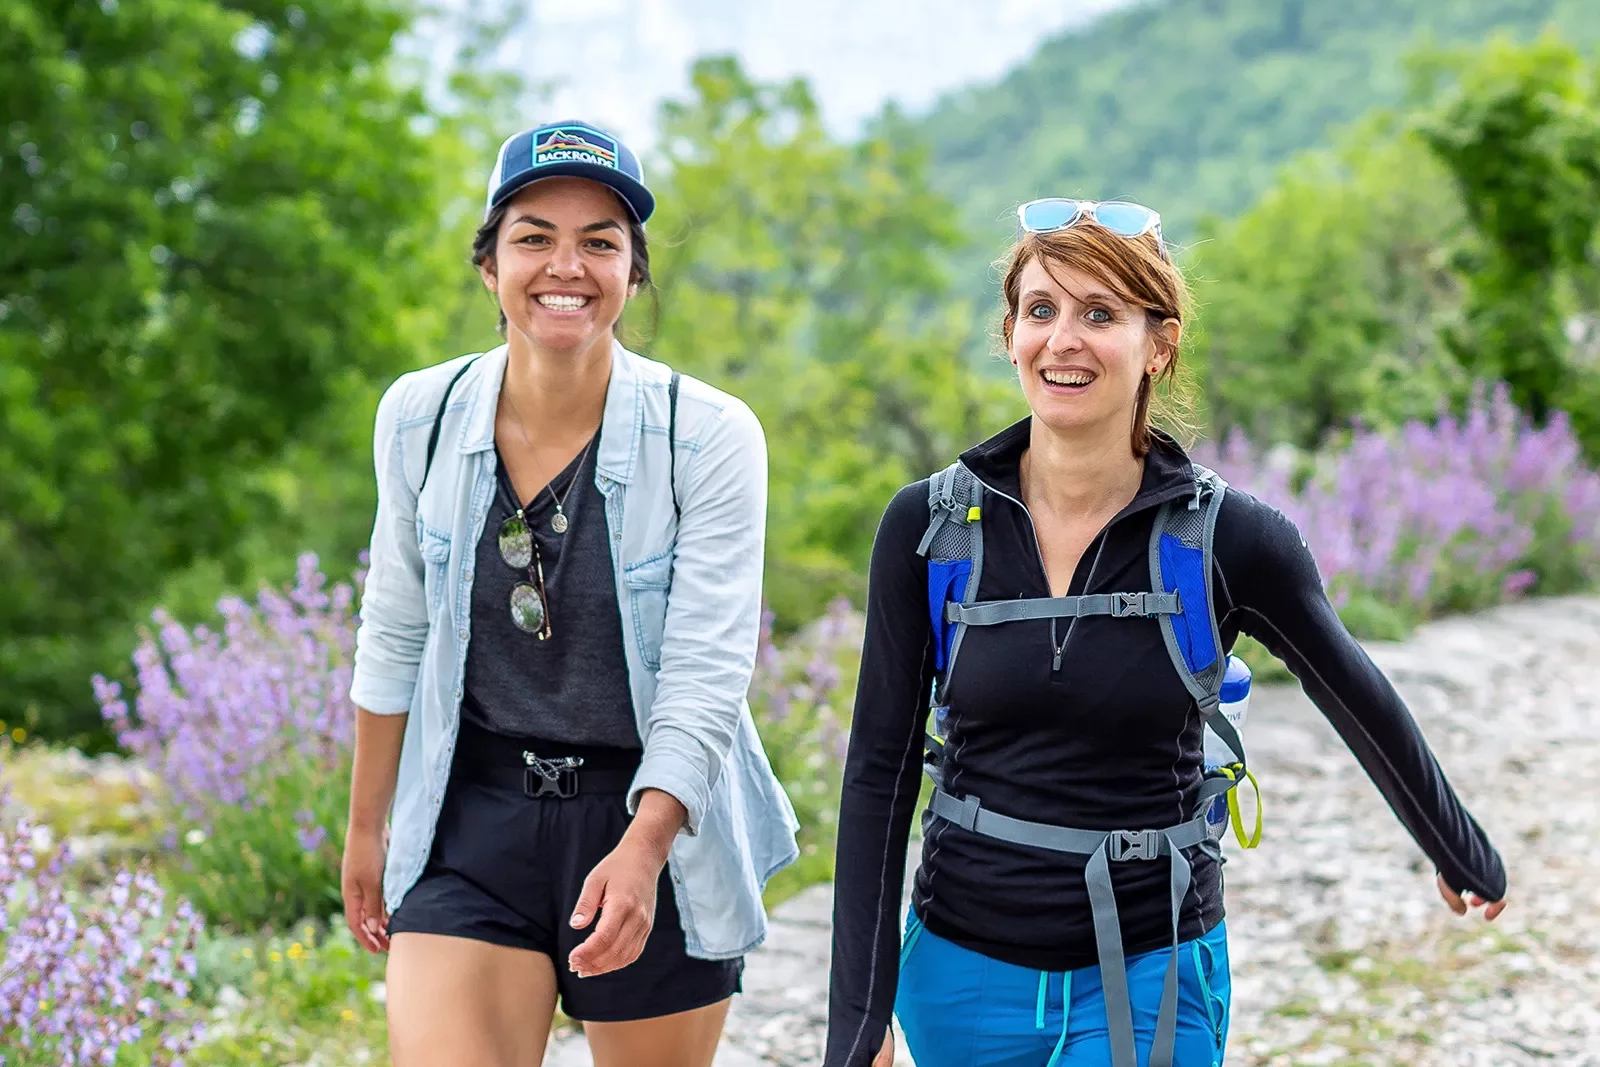 Two hikers on a trail with wildflowers.